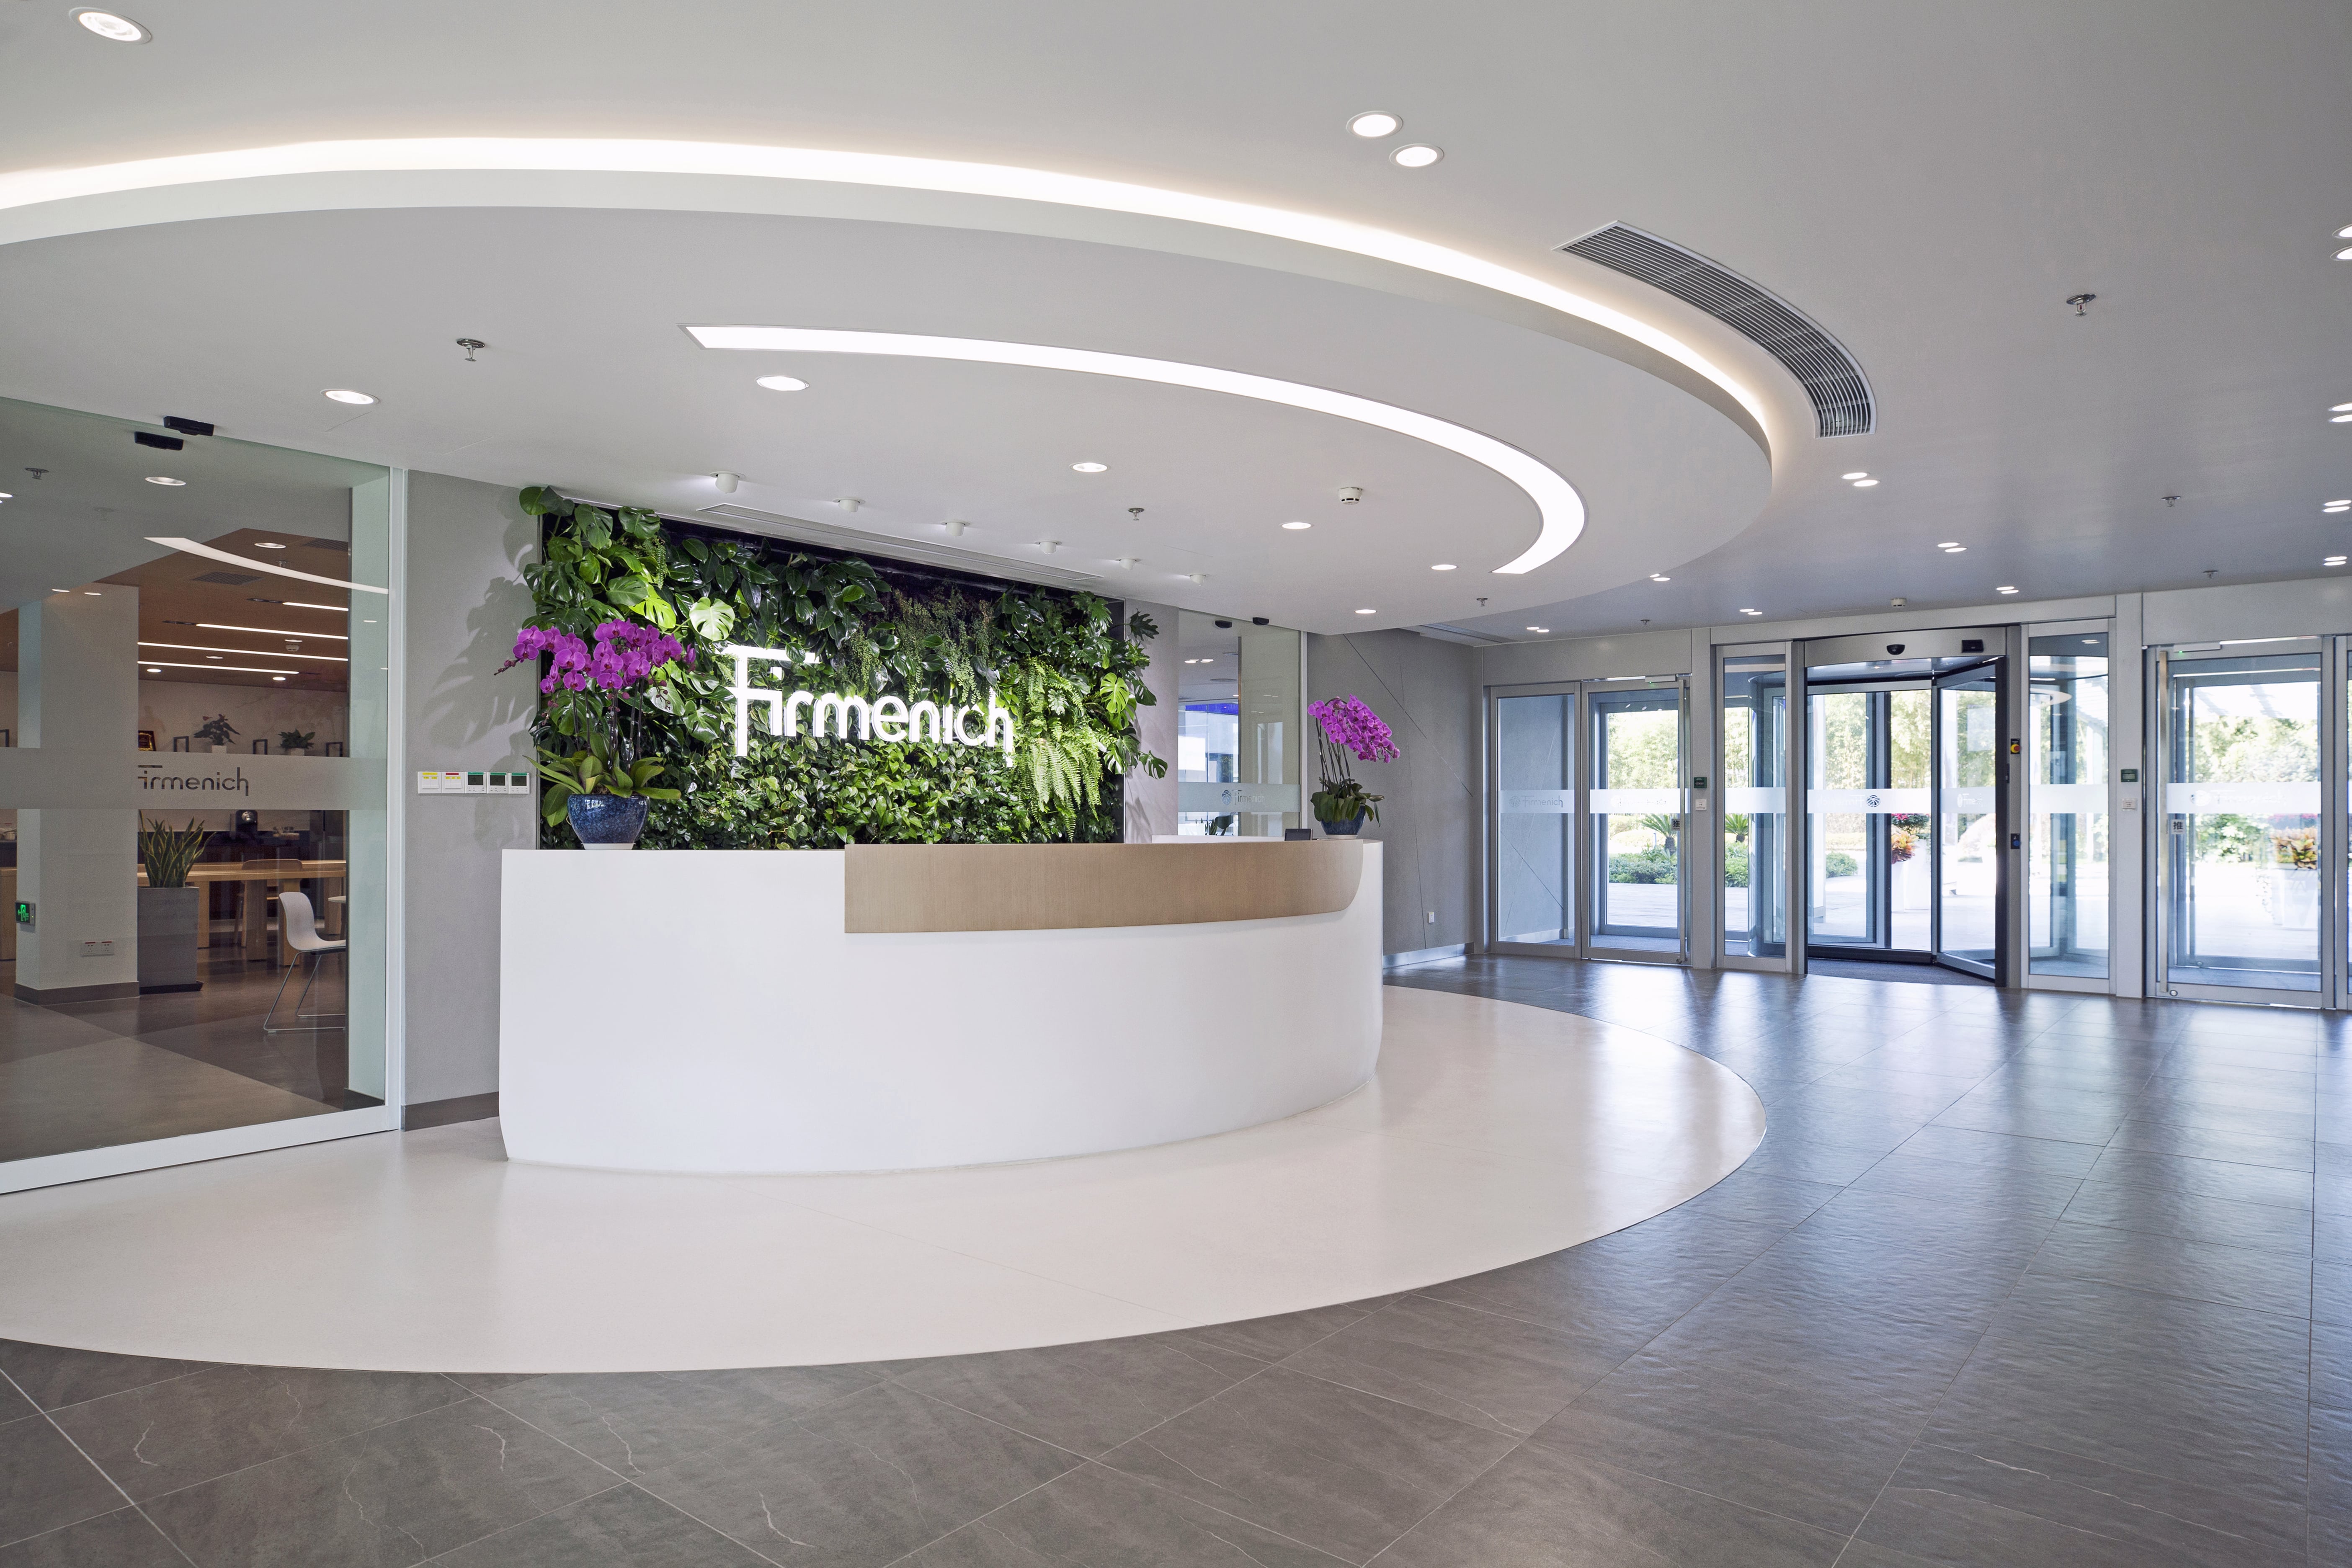 Firmenich Shanghai developed a workplace that focused on lab work and collaborative work